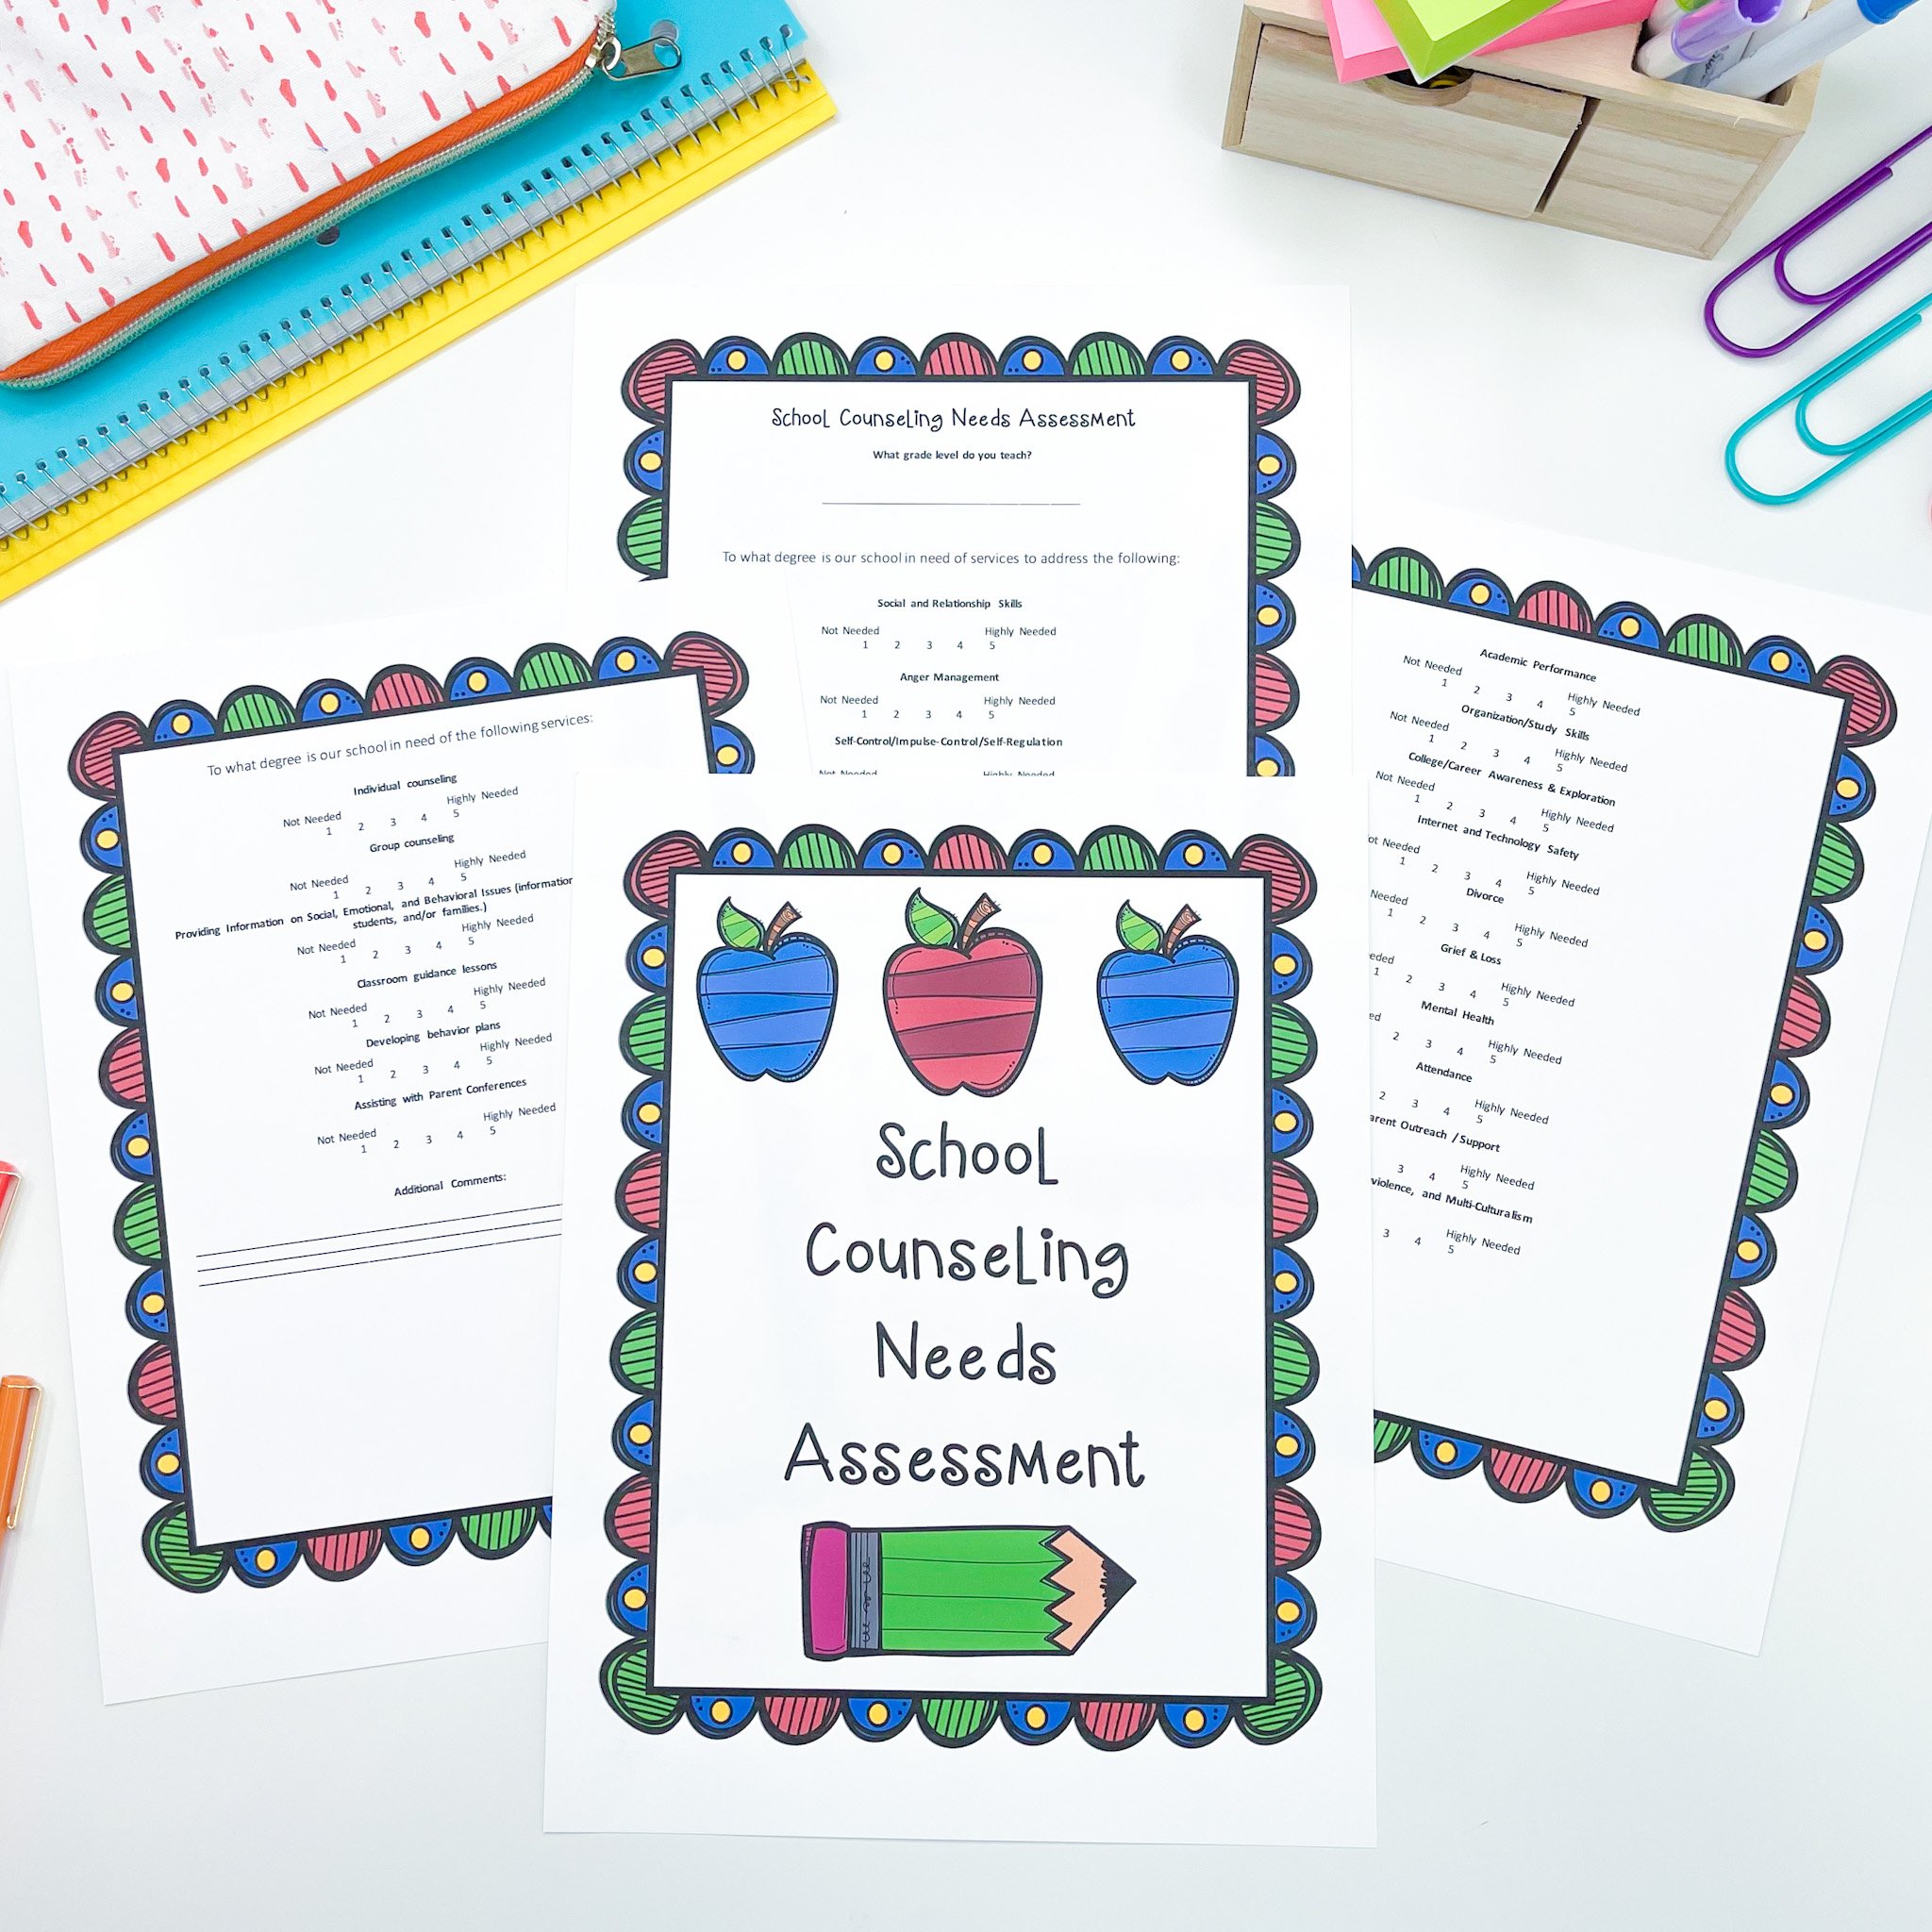 printed school counseling needs assessment